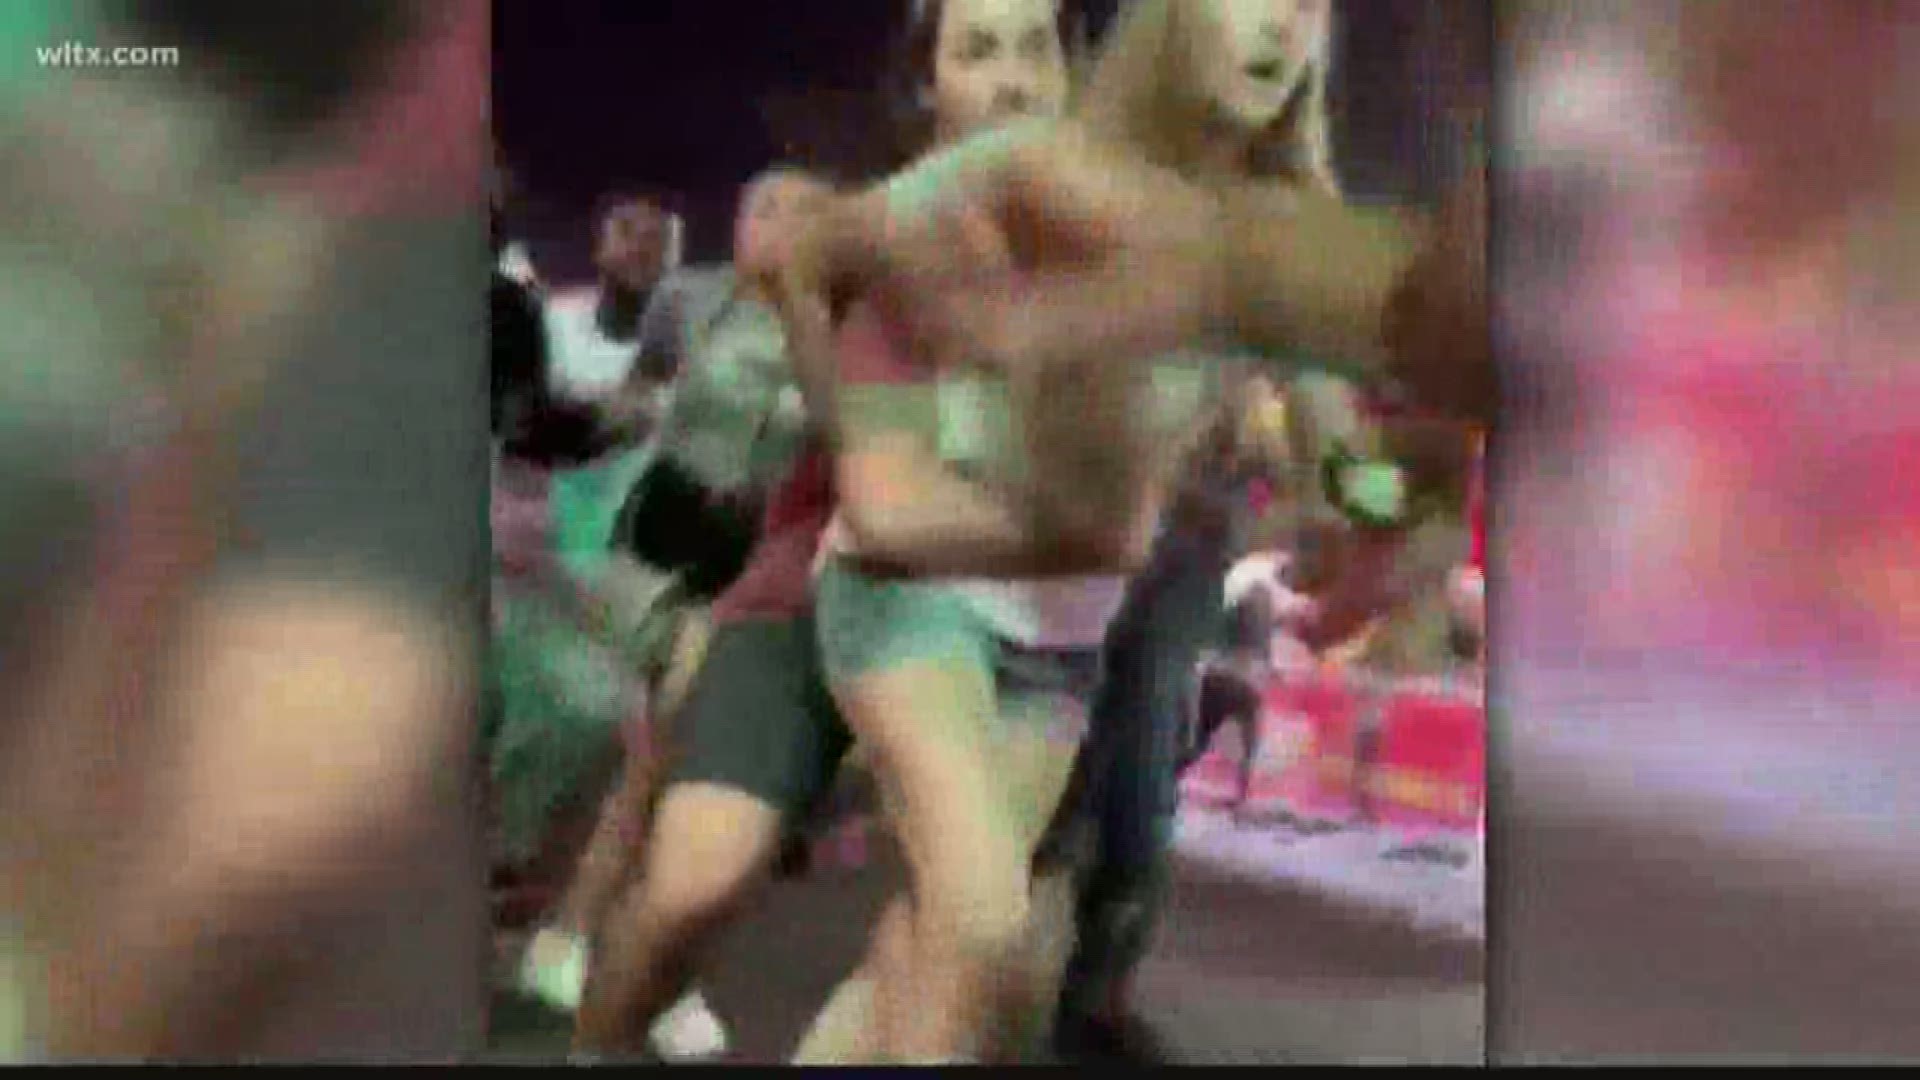 One juvenile was arrested for a fight at the fair and is charged with disorderly conduct